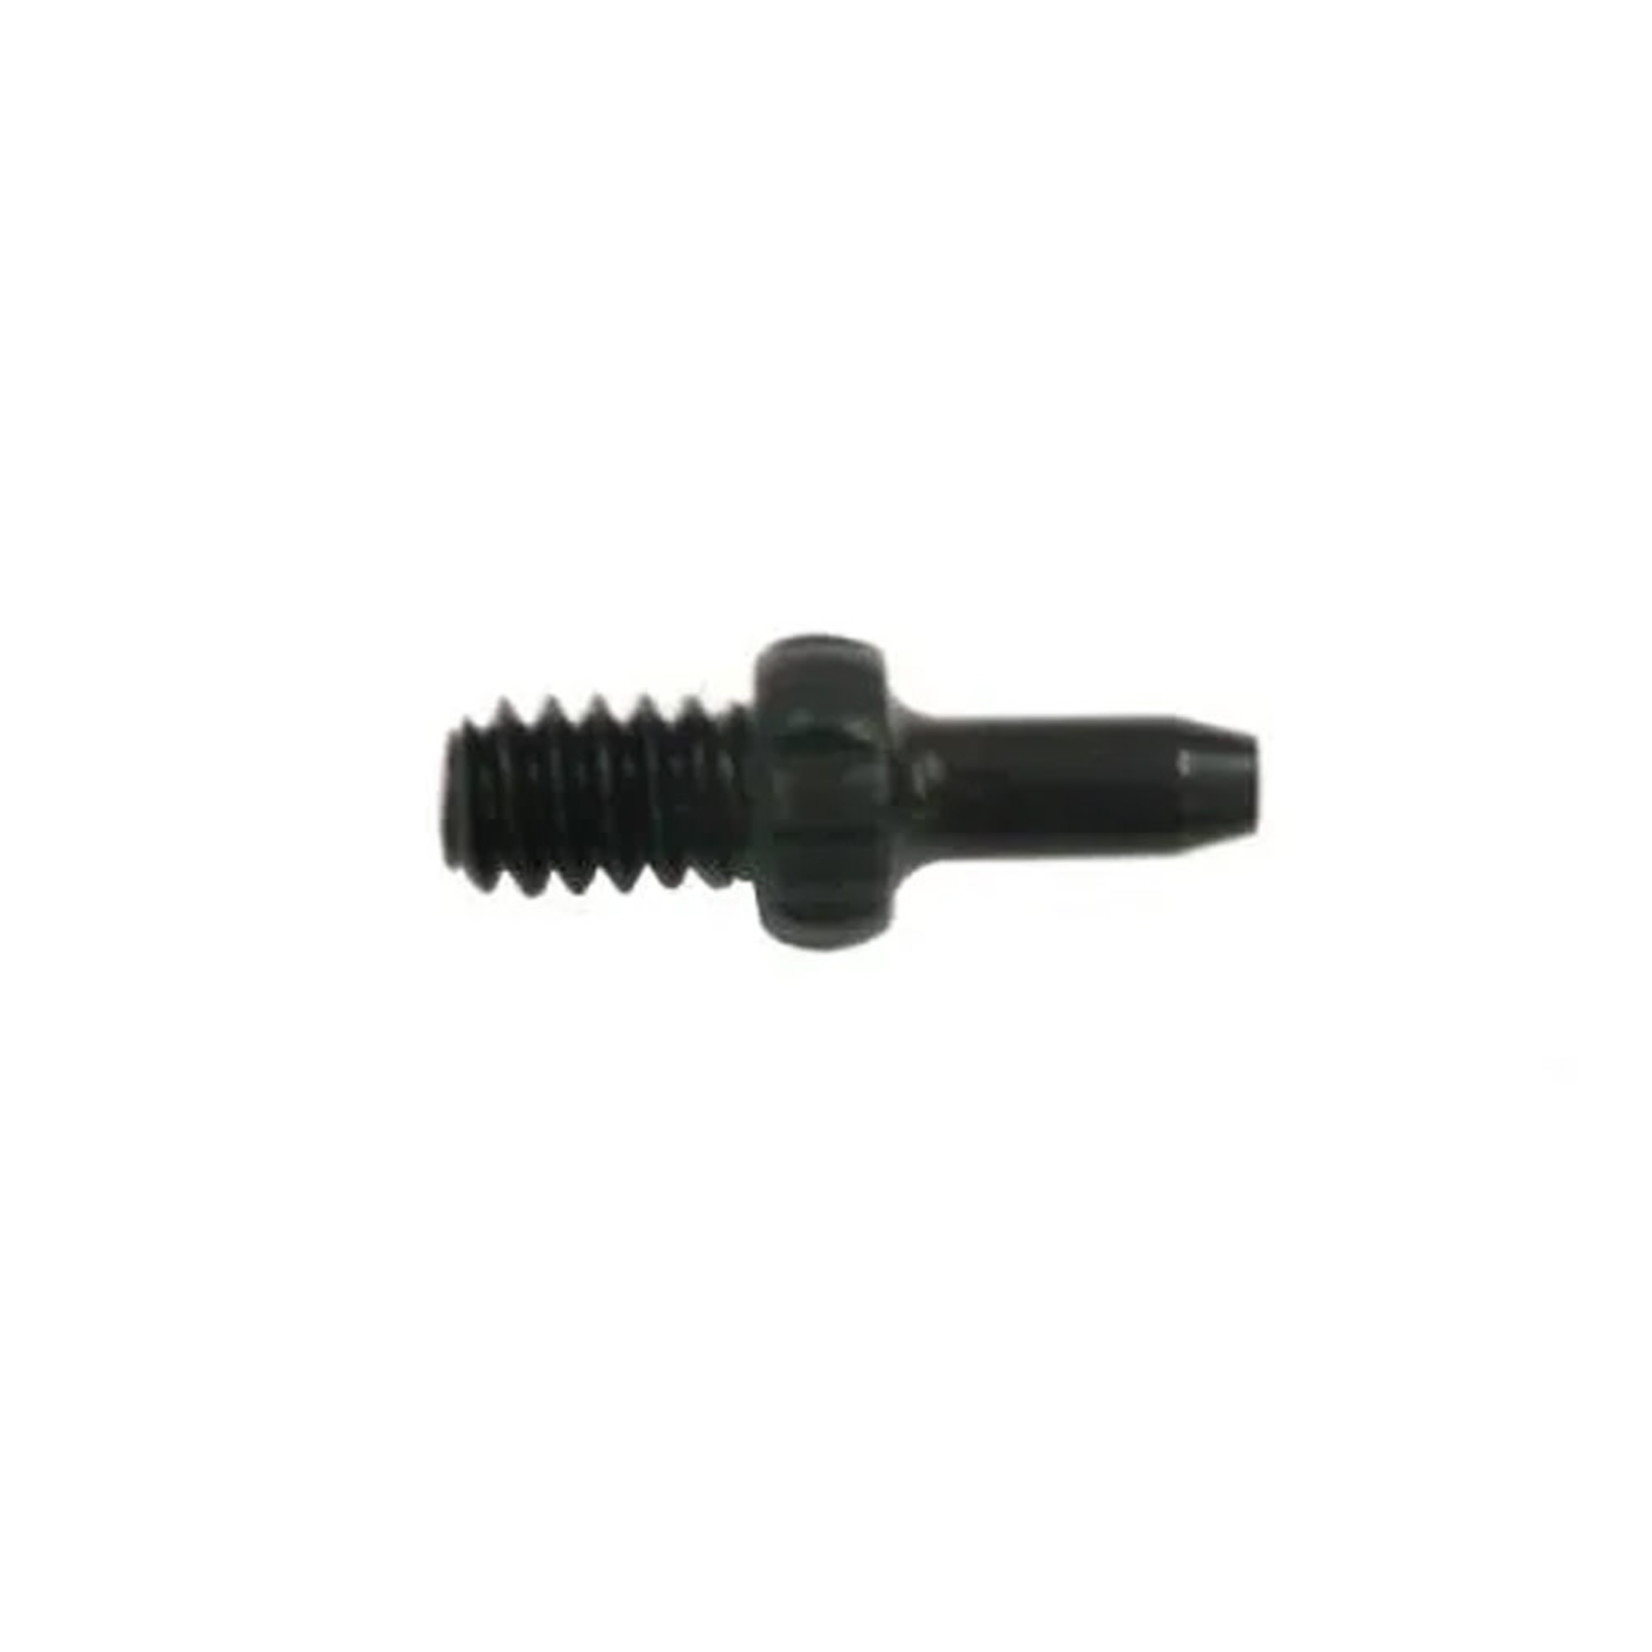 Incomex Trading Pty Ltd BPW Replacement Pin For Chain Rivet Extractor 6609 & 6696